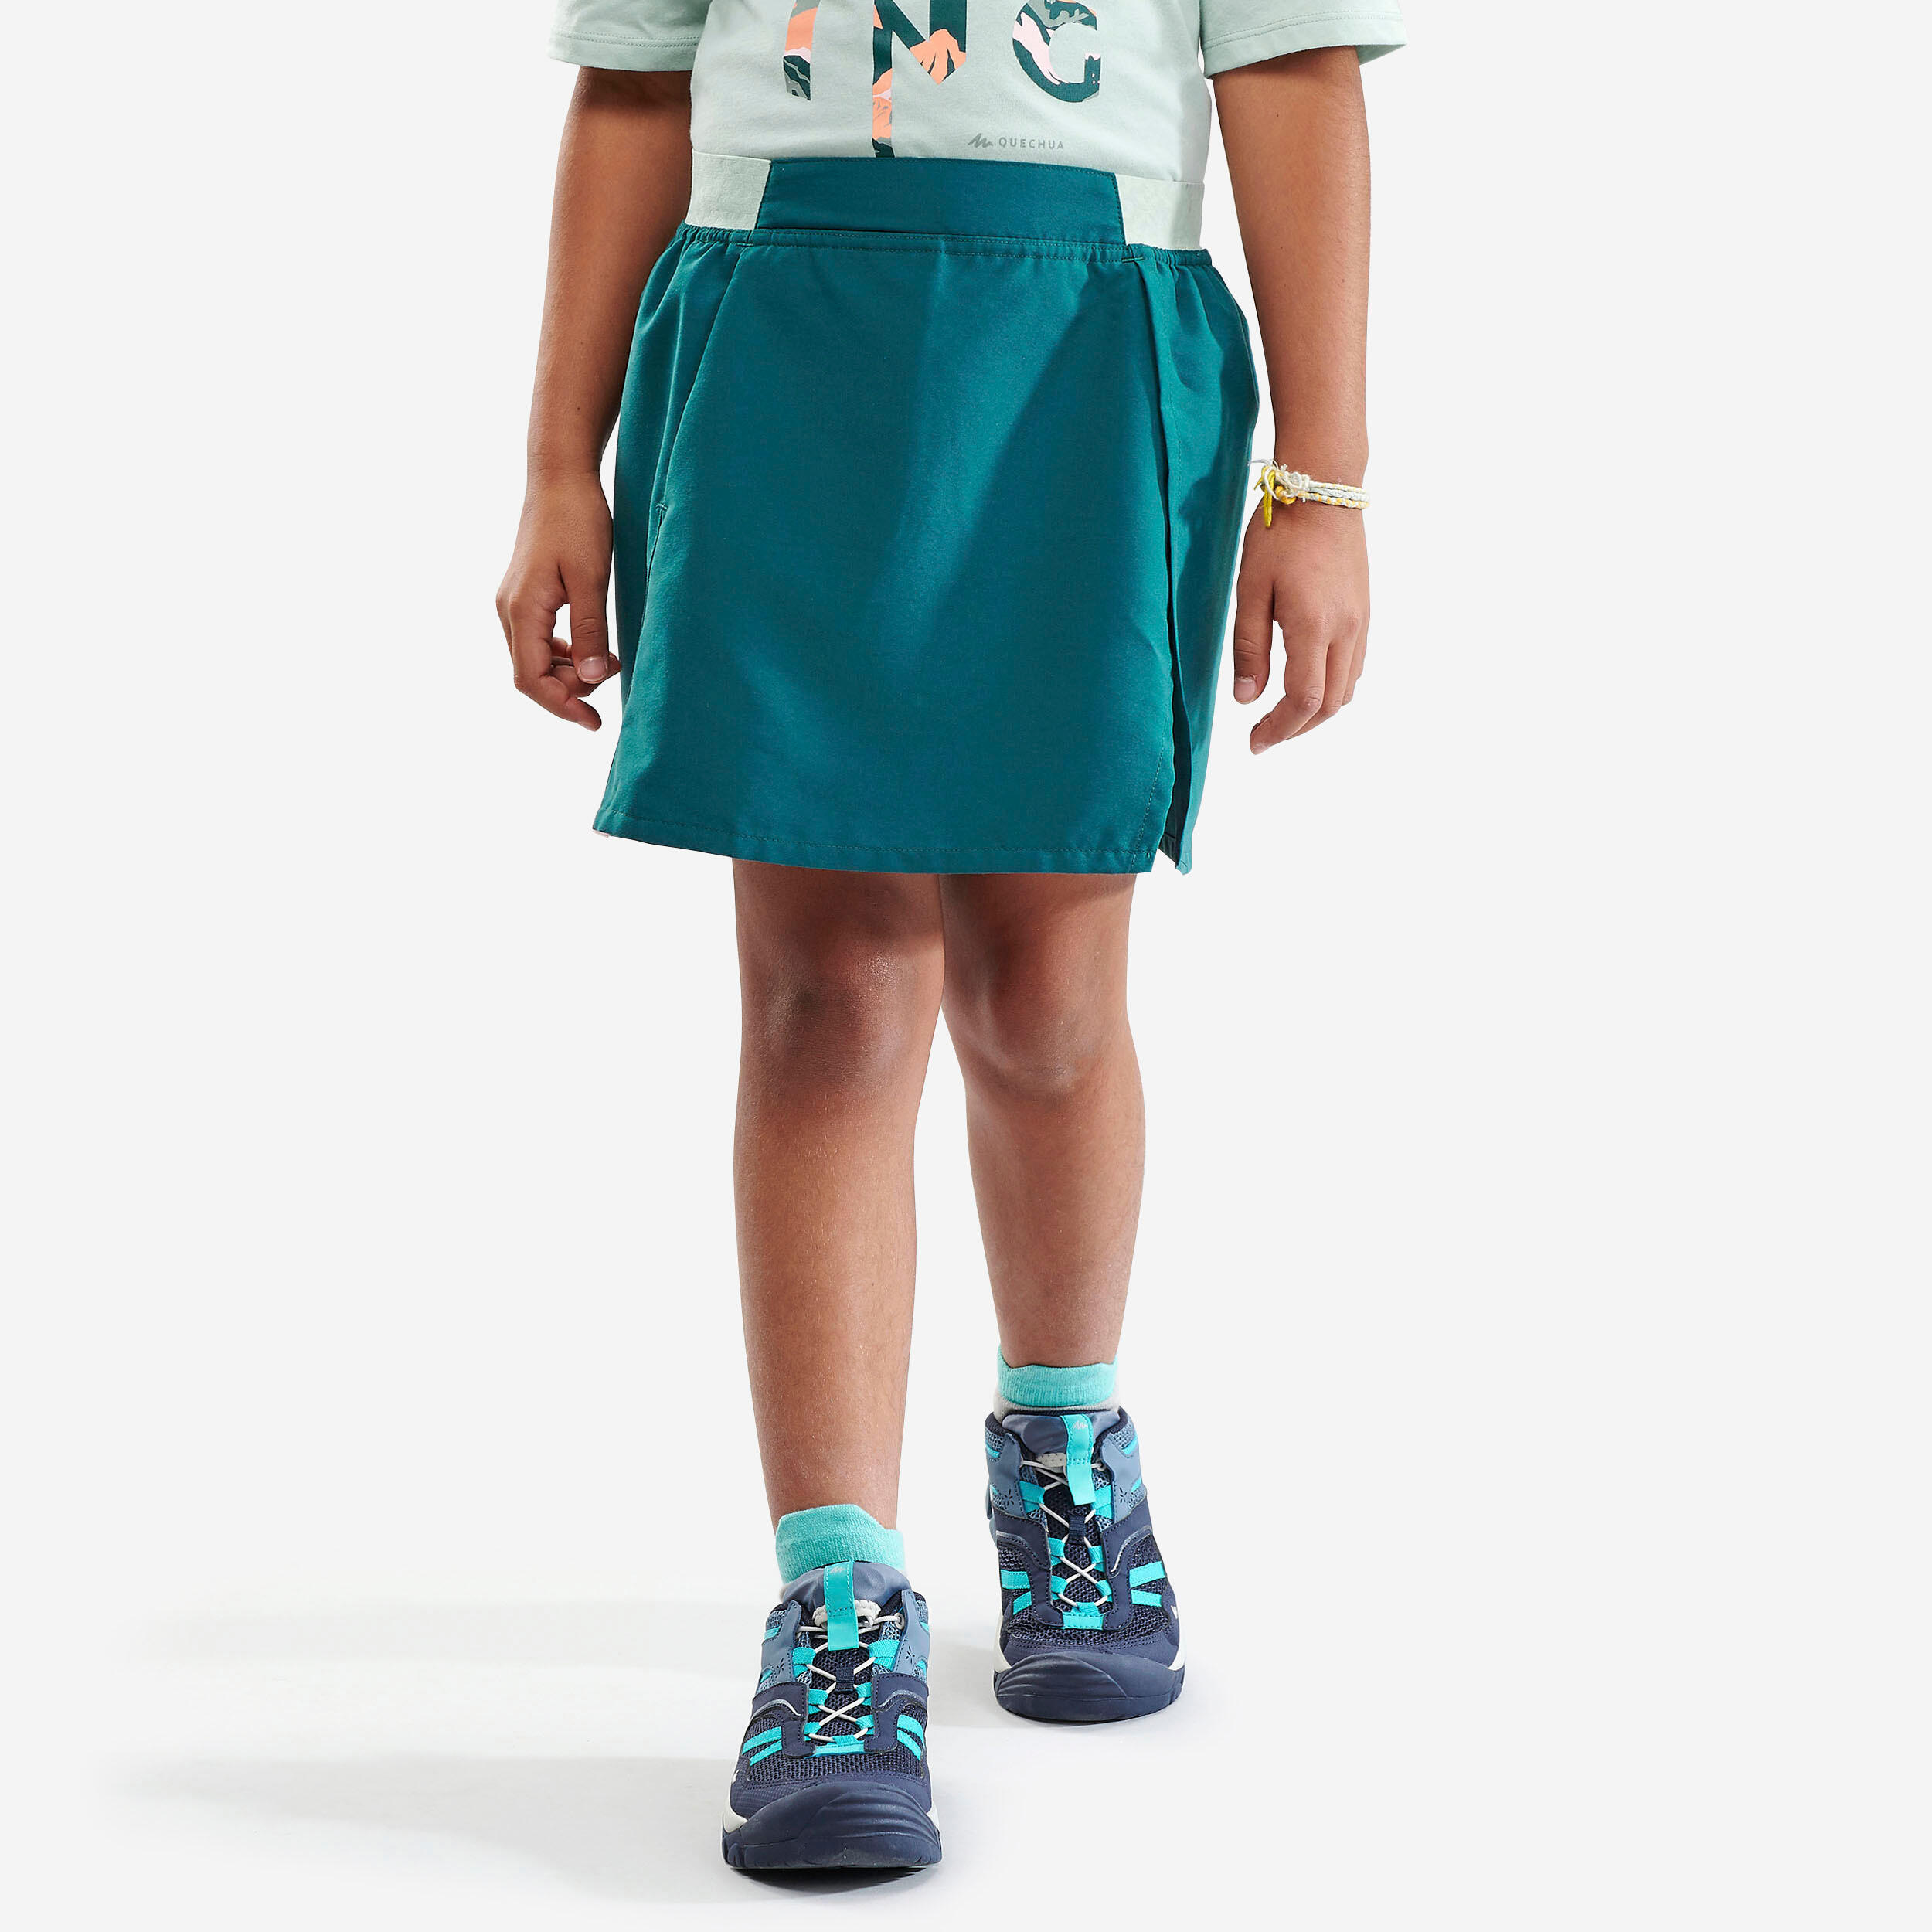 QUECHUA Kids’ Hiking Skort - MH100 Aged 7-15 - Turquoise